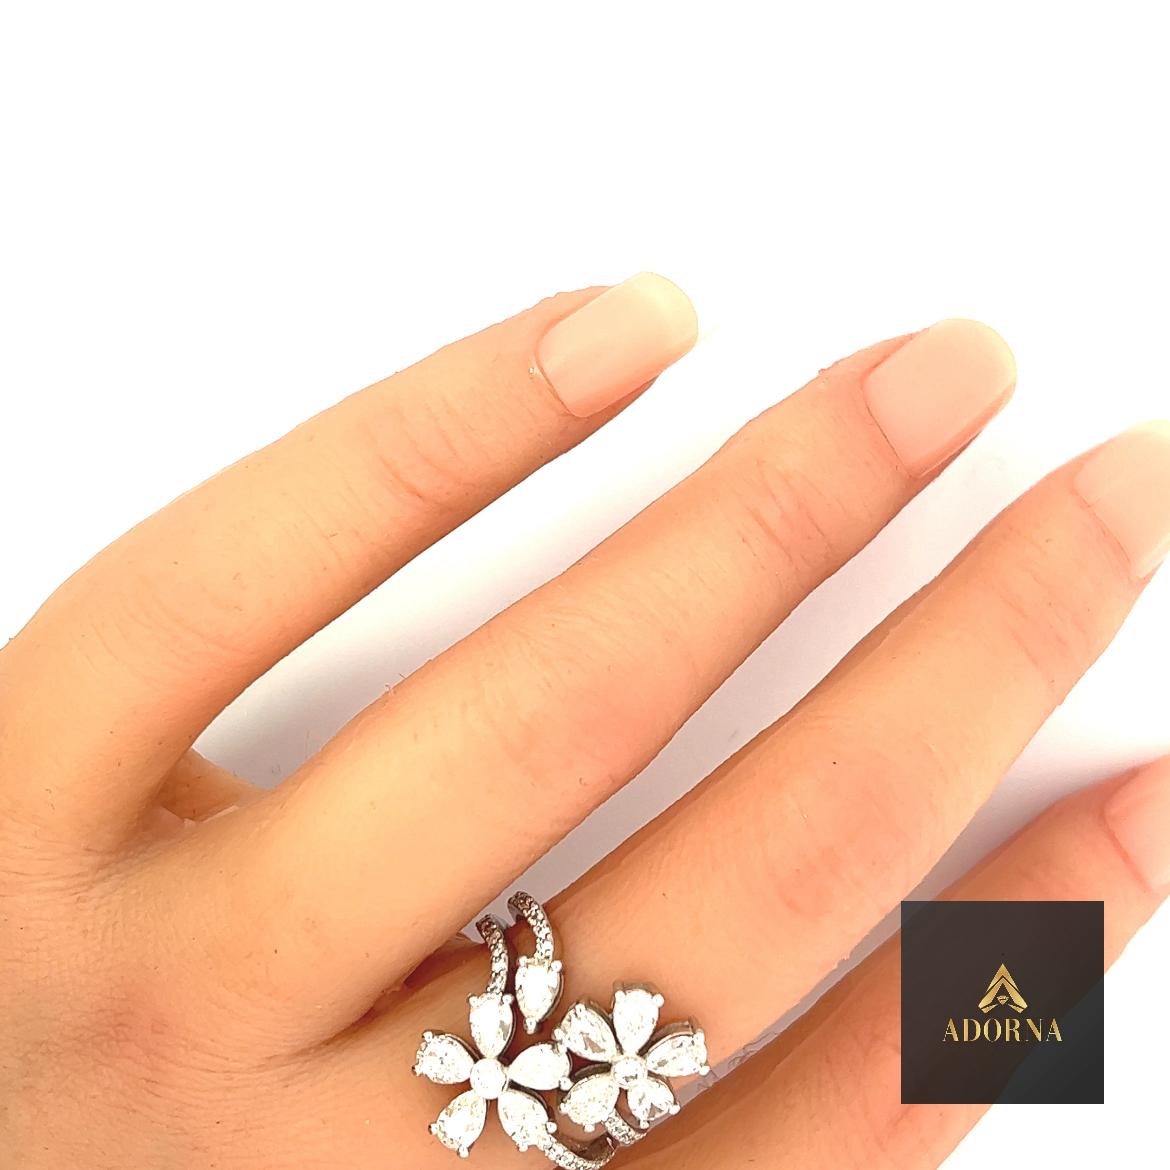 Adorna Lux - Claire 18-karat white gold ring For Sale 1